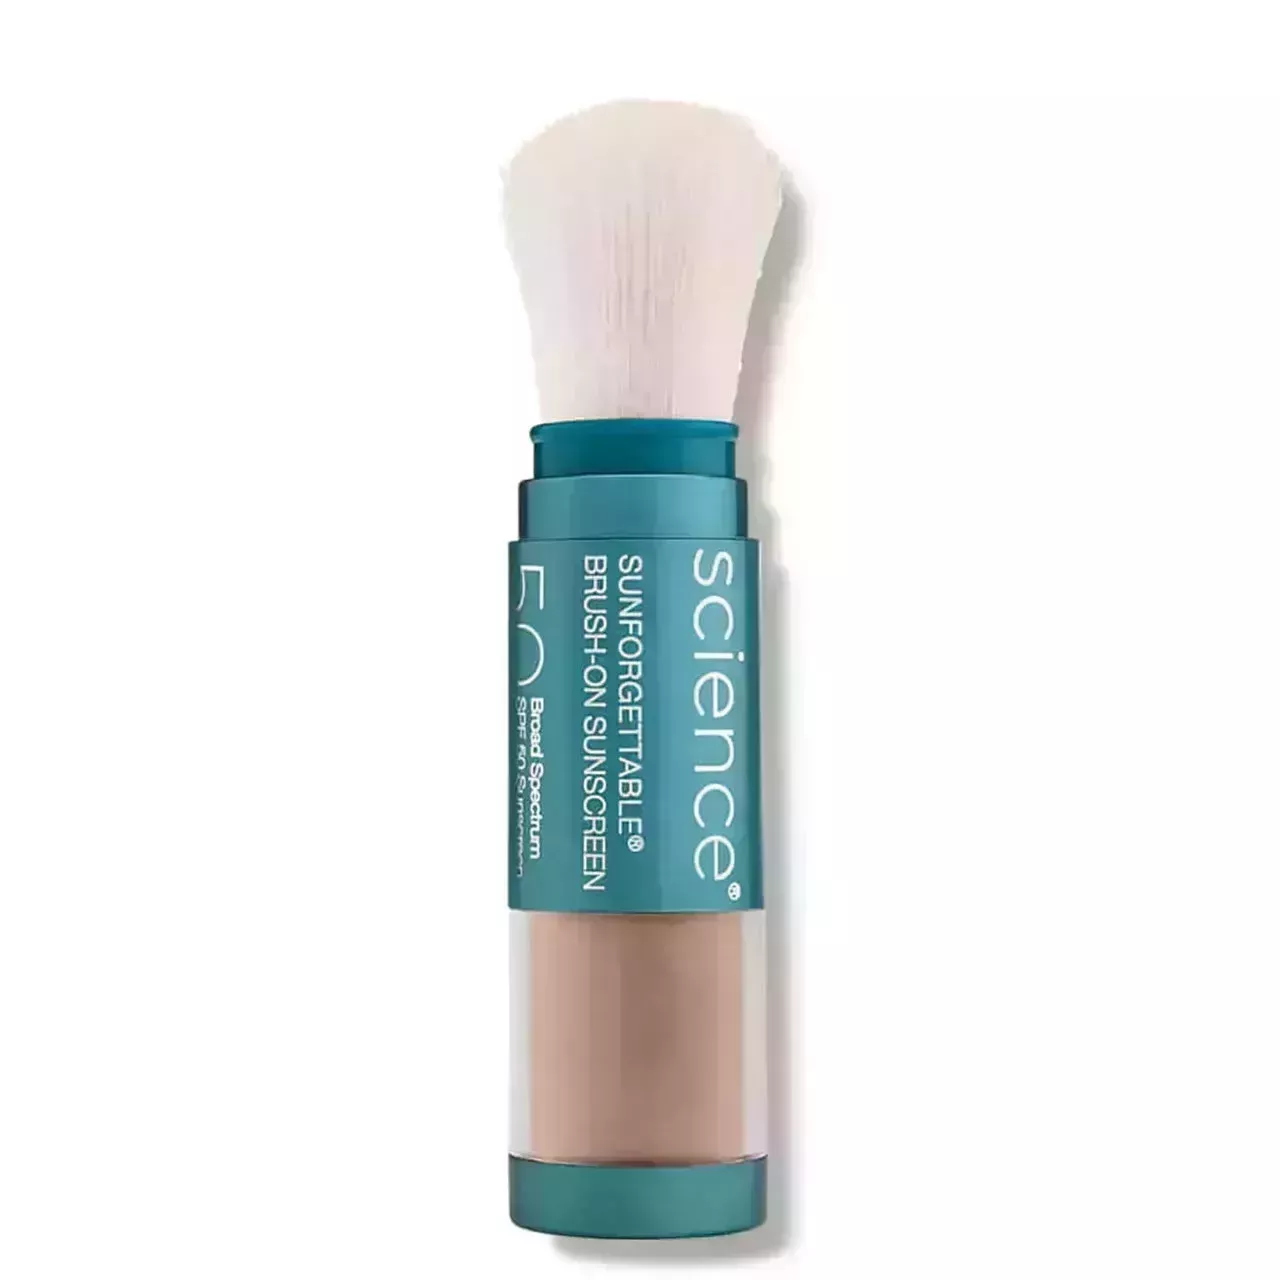 Colorescience Sunforgettable Total Protection Brush-On Shield SPF 50 on white background